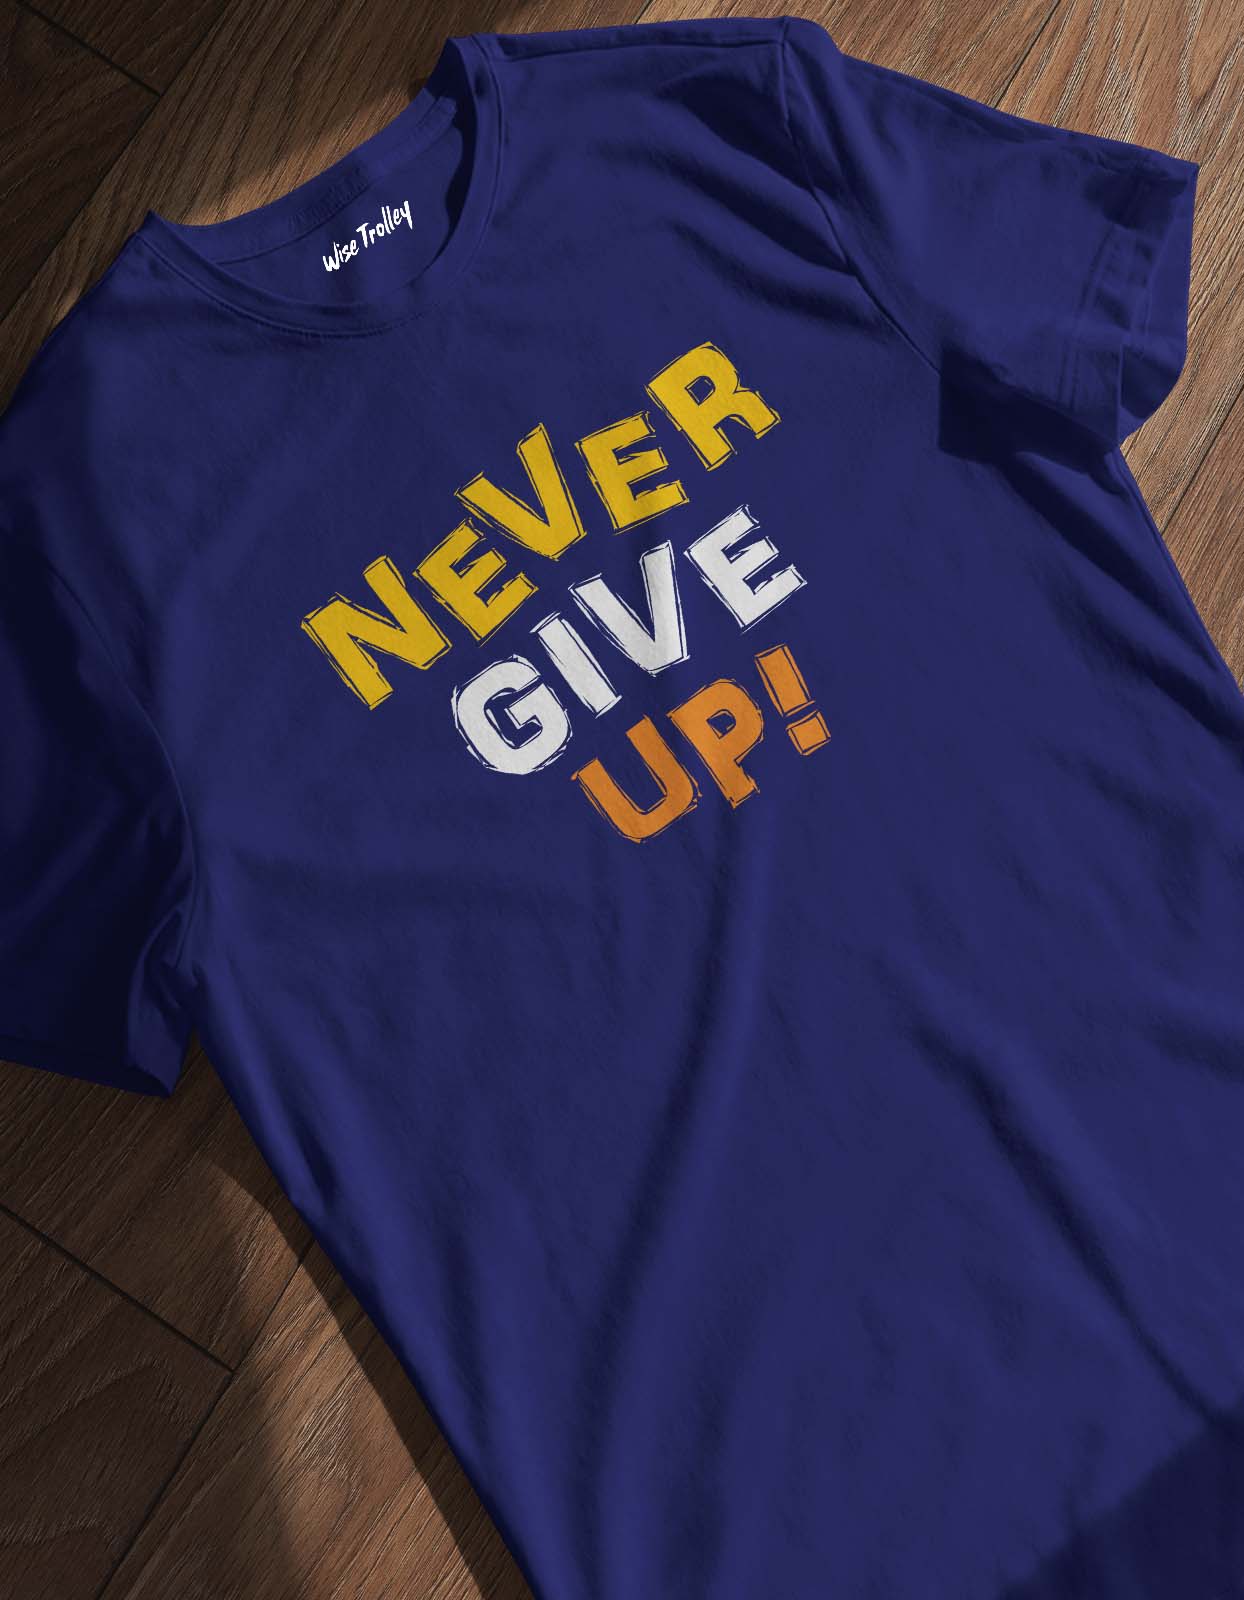 Never Give Up! T shirt